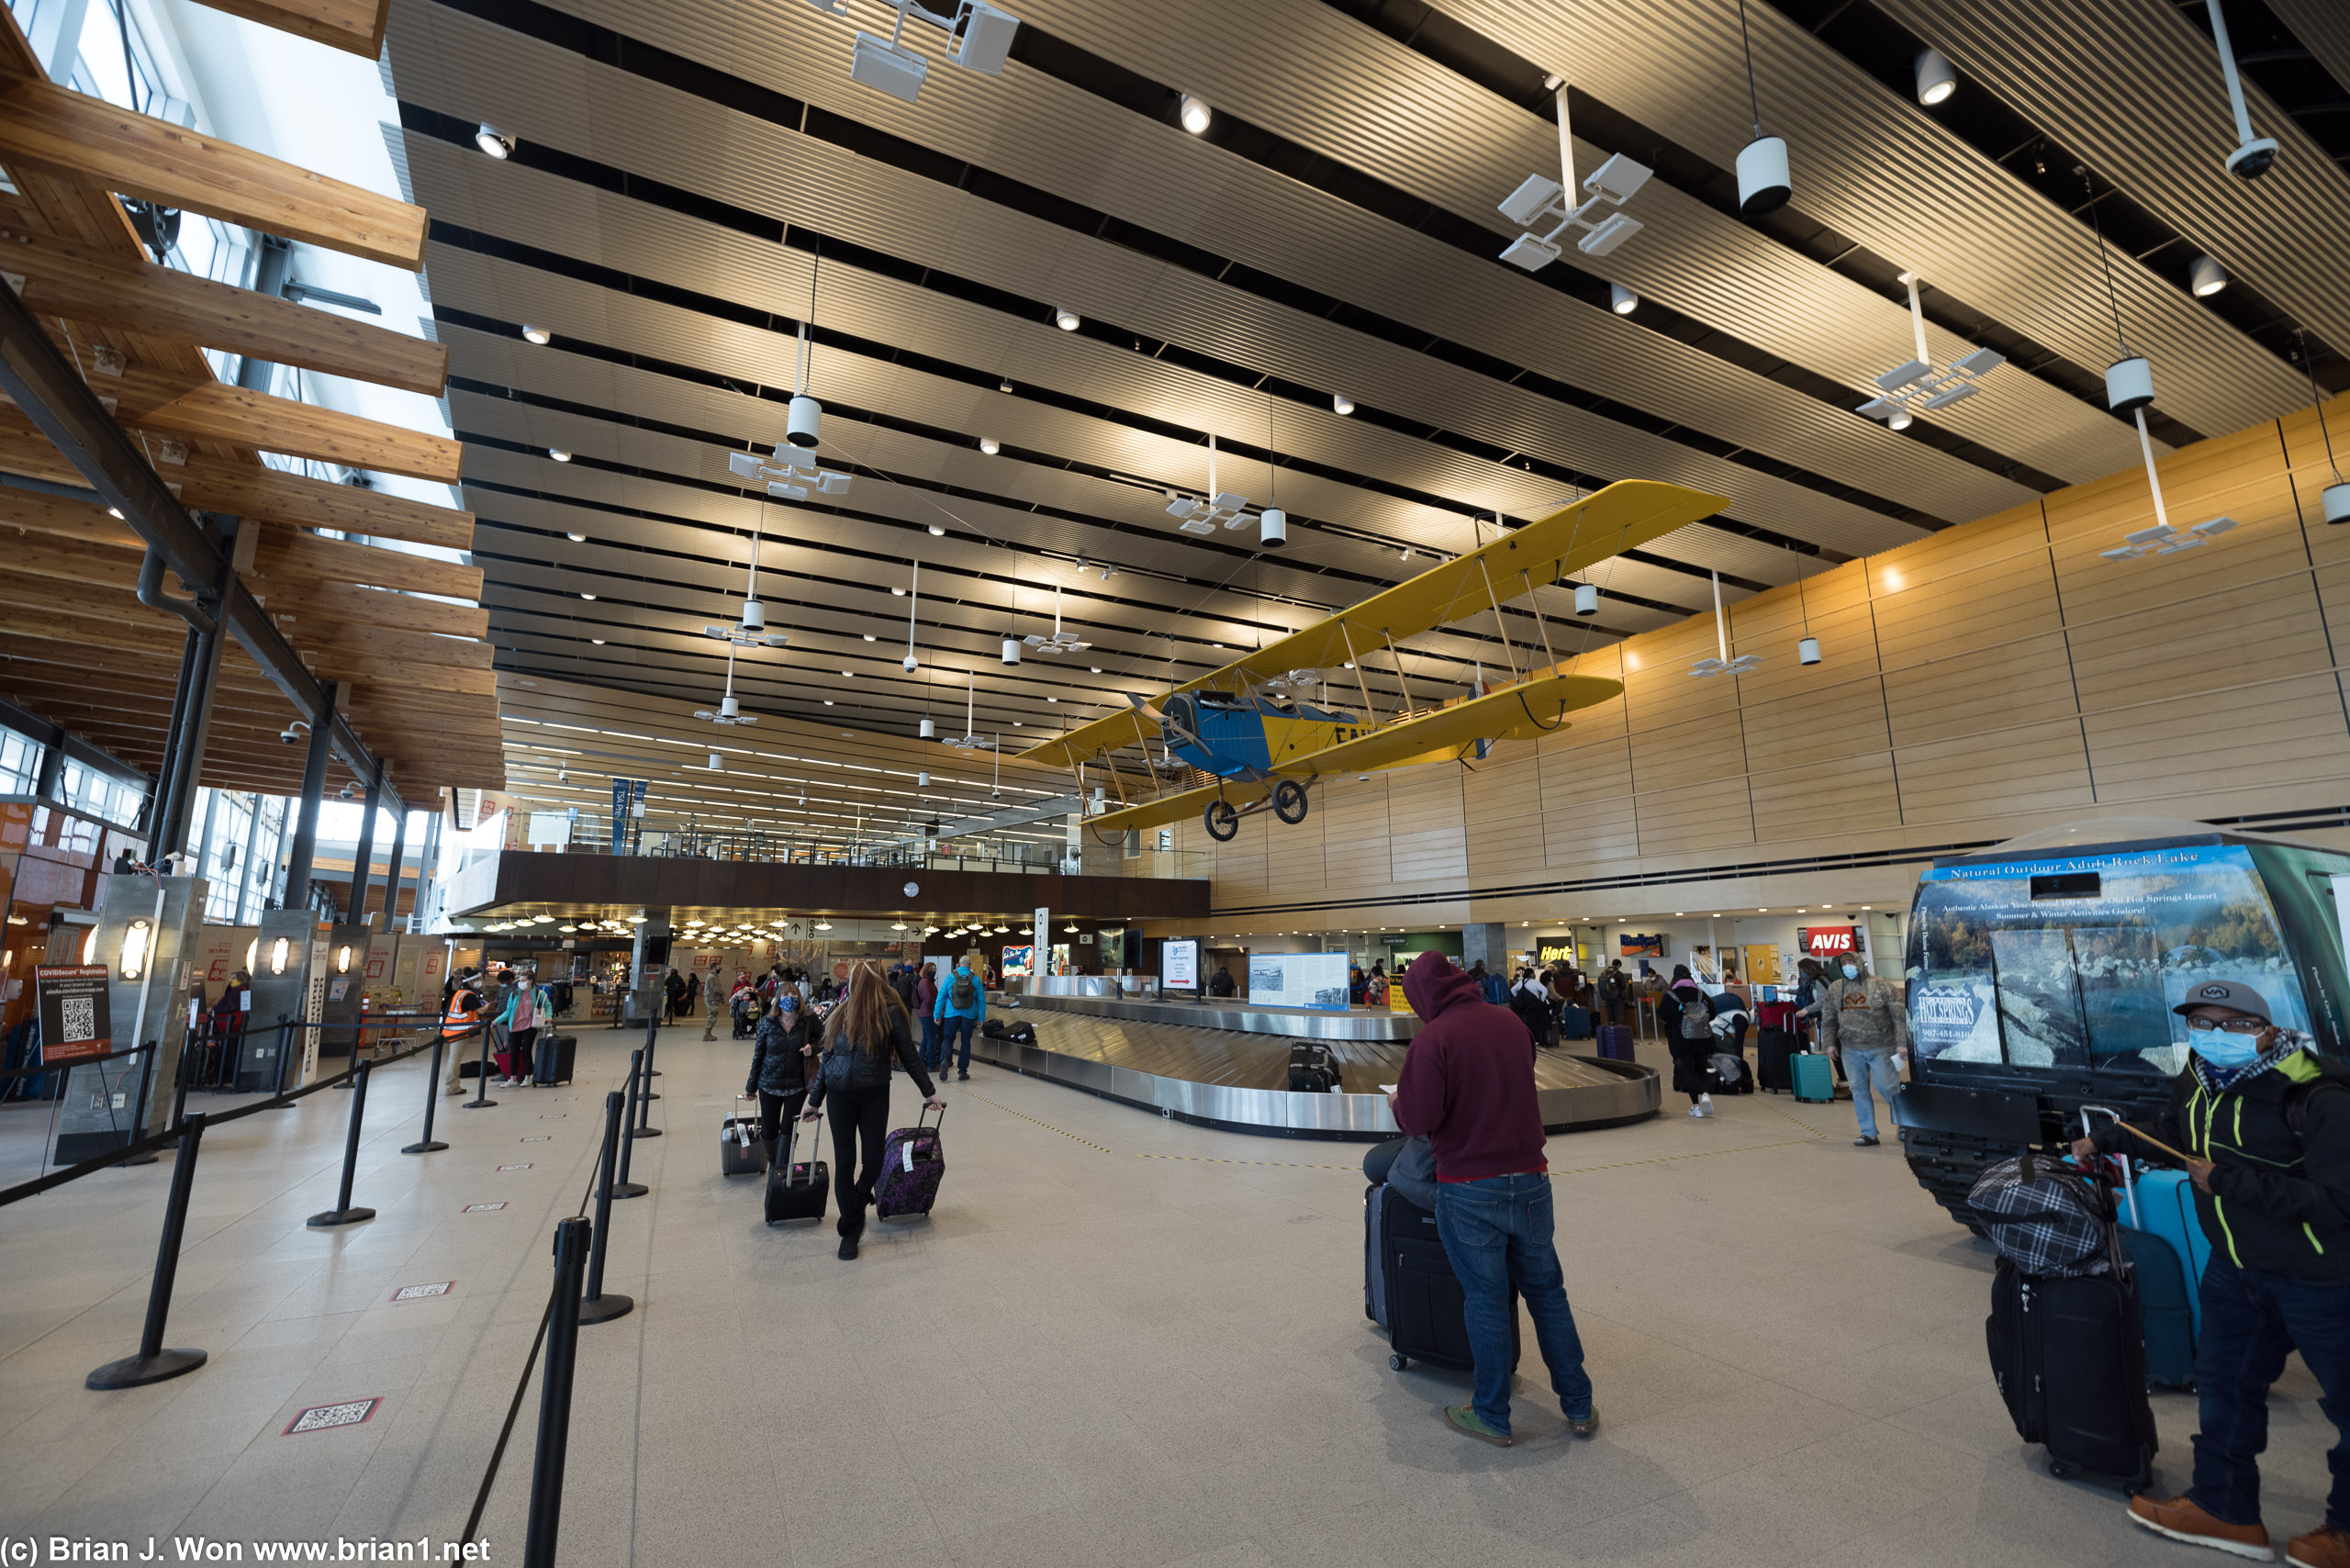 Fairbanks International Airport hands an entire airplane from the ceiling?